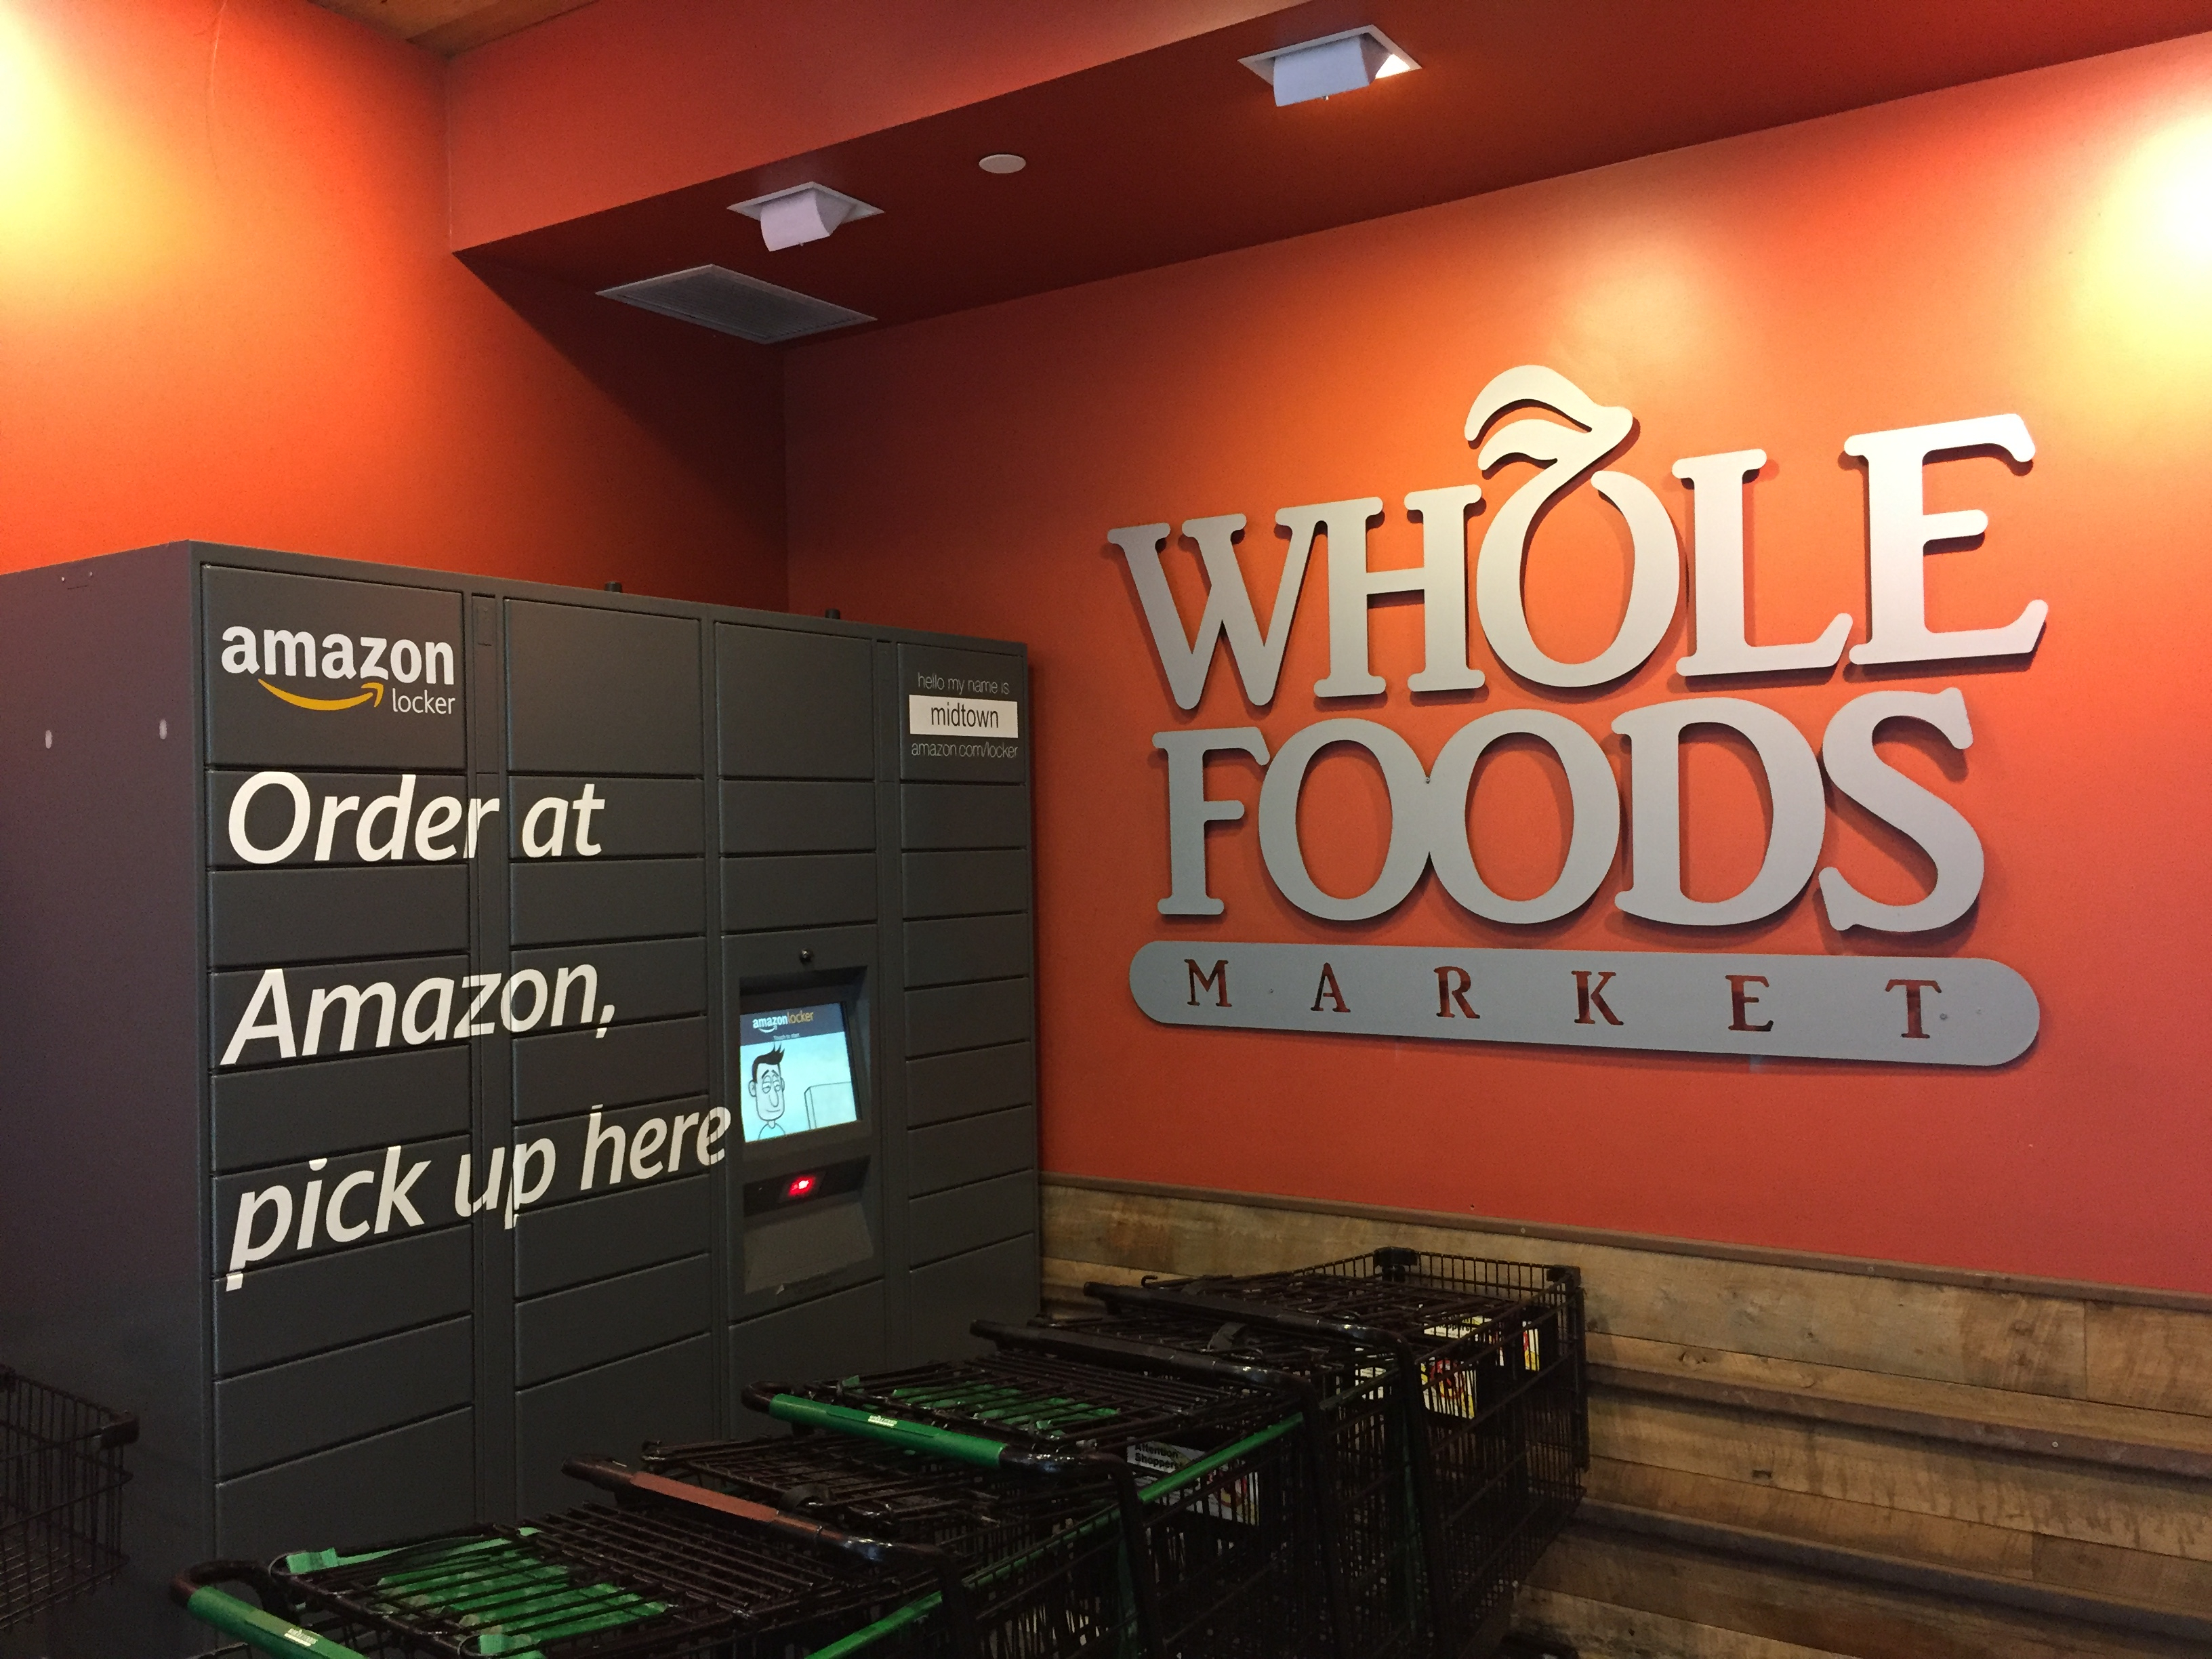 Amazon Whole Foods: Checking in on the Grocery Industry Market Research